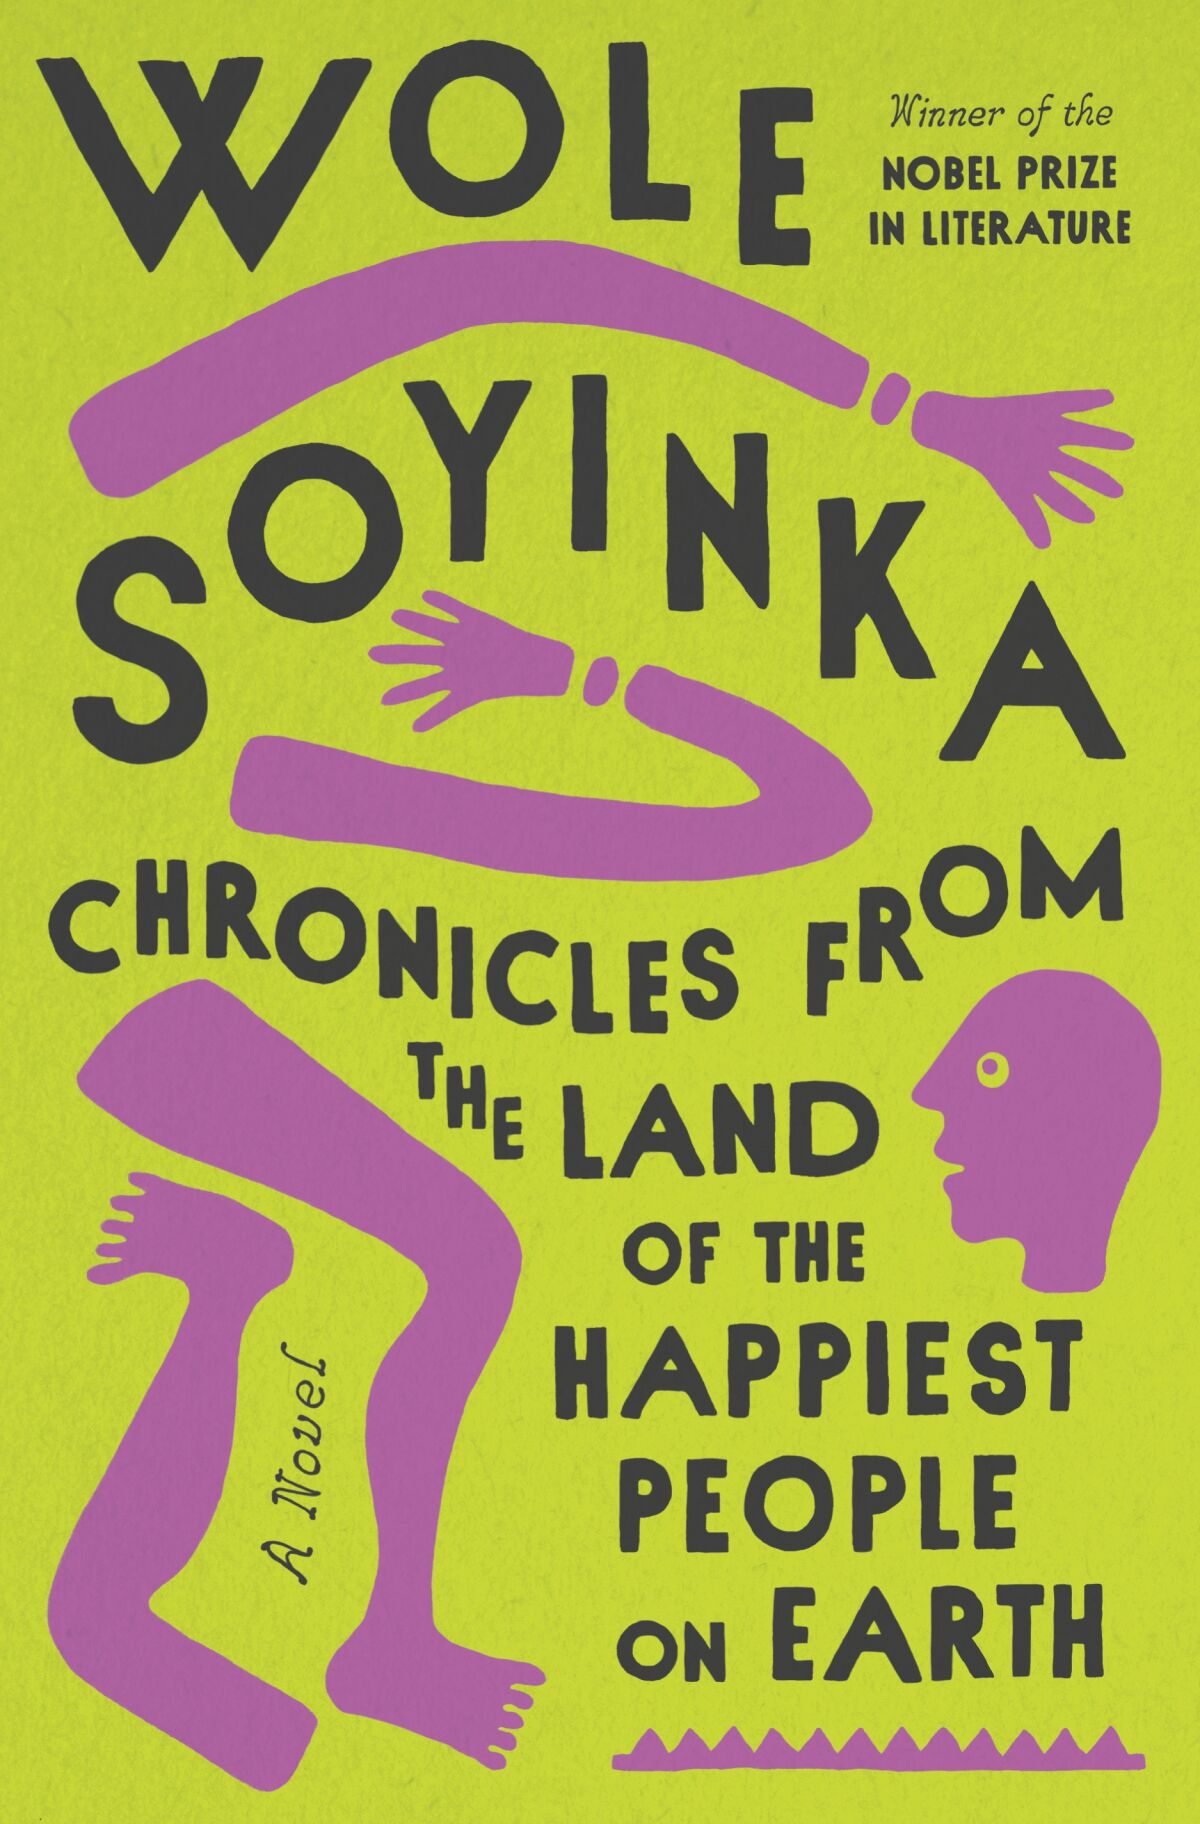 "Chronicles from the Land of the Happiest People on Earth," by Wole Soyinka